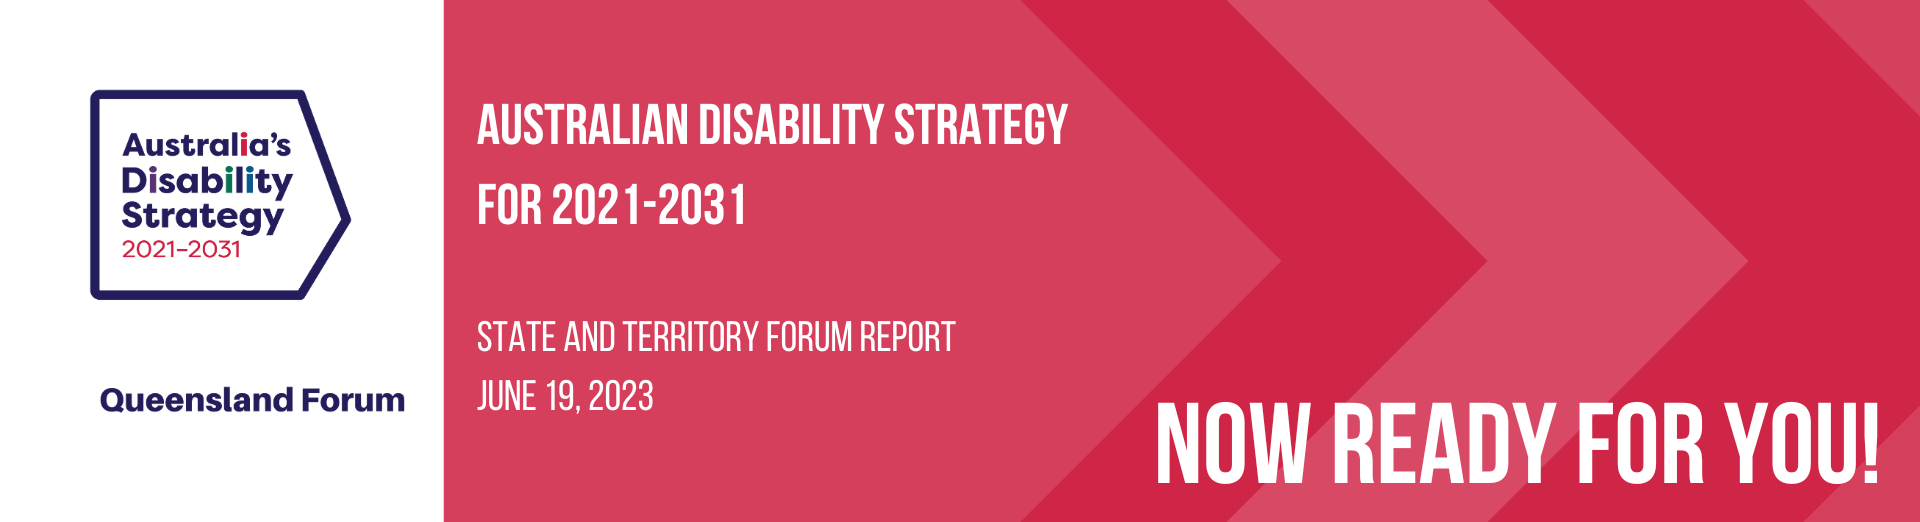 White and red background. Left side there is Australia Disability Strategy 2021-2031. Text says Queensland Forum. On the right side, Australian Disability Strategy for 2021-2031. State and Territory Forum Report June19, 2023. Now Ready for You!